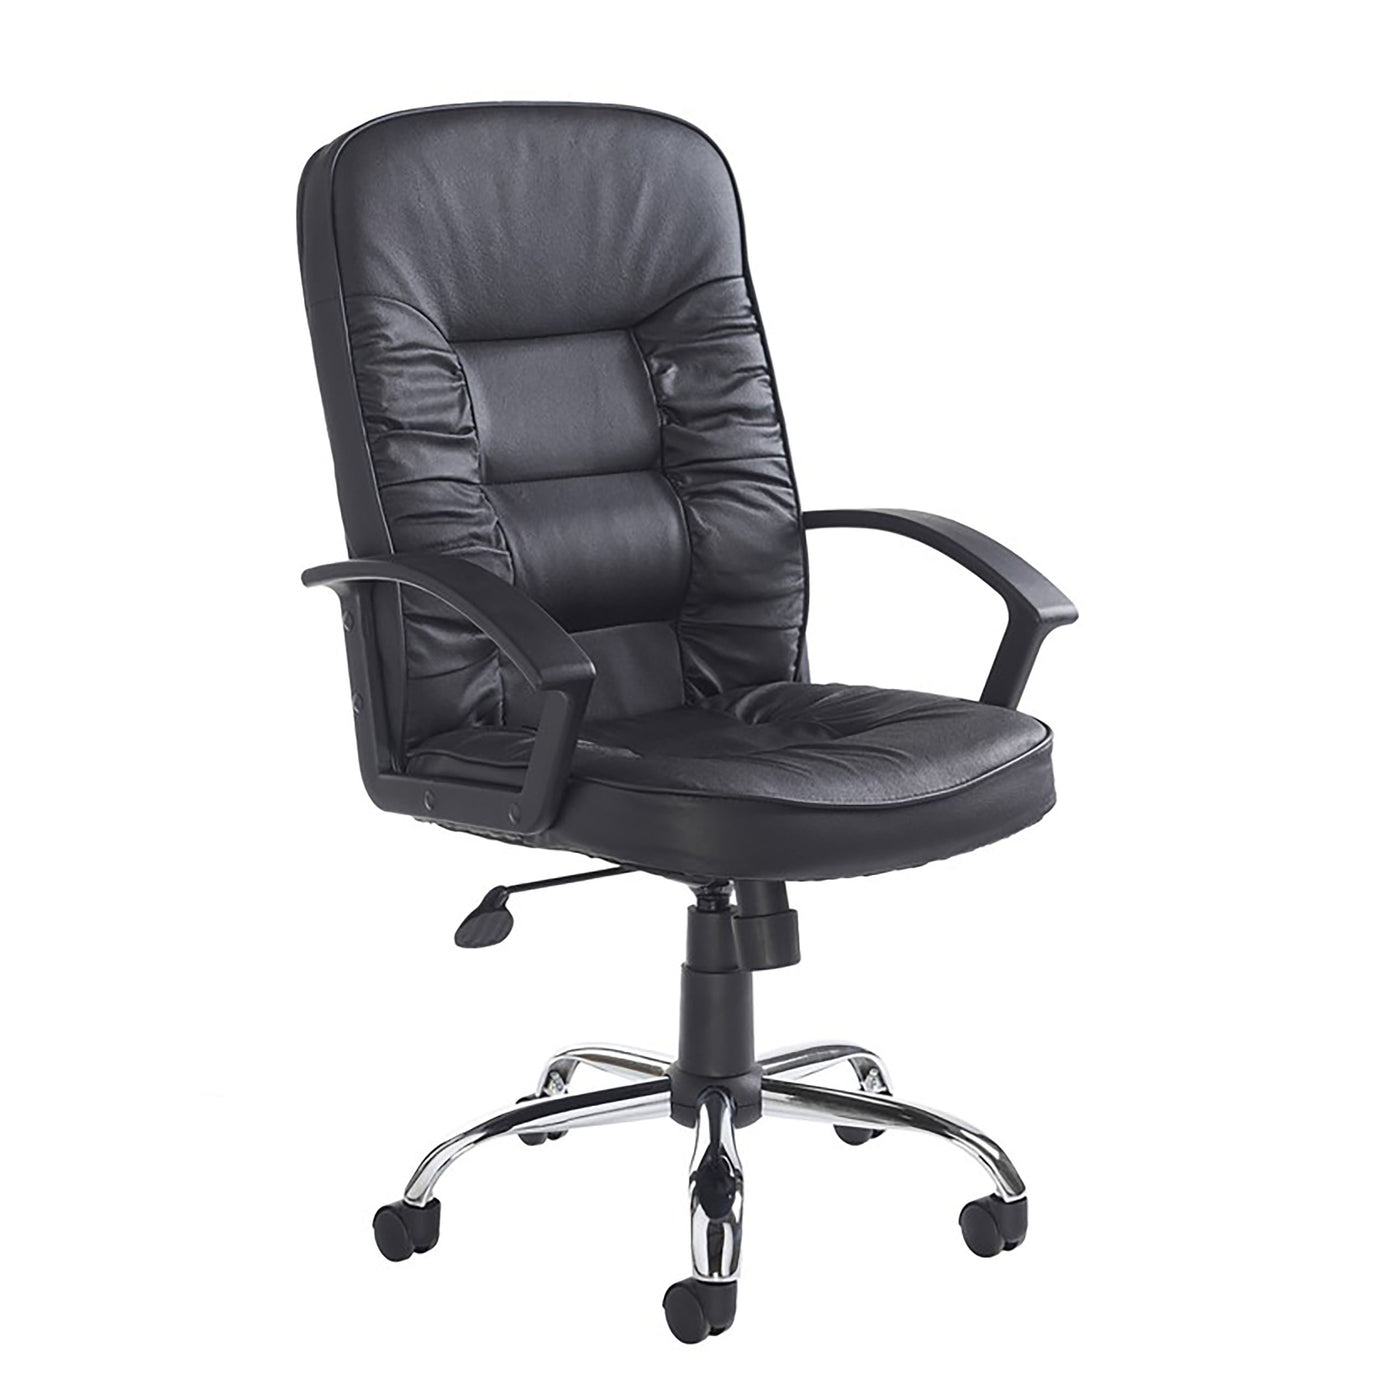 Hertford Black Leather Faced Home Office Chair | Home Office Furniture | Ergonomic Office Chair | Home Office Furnishings